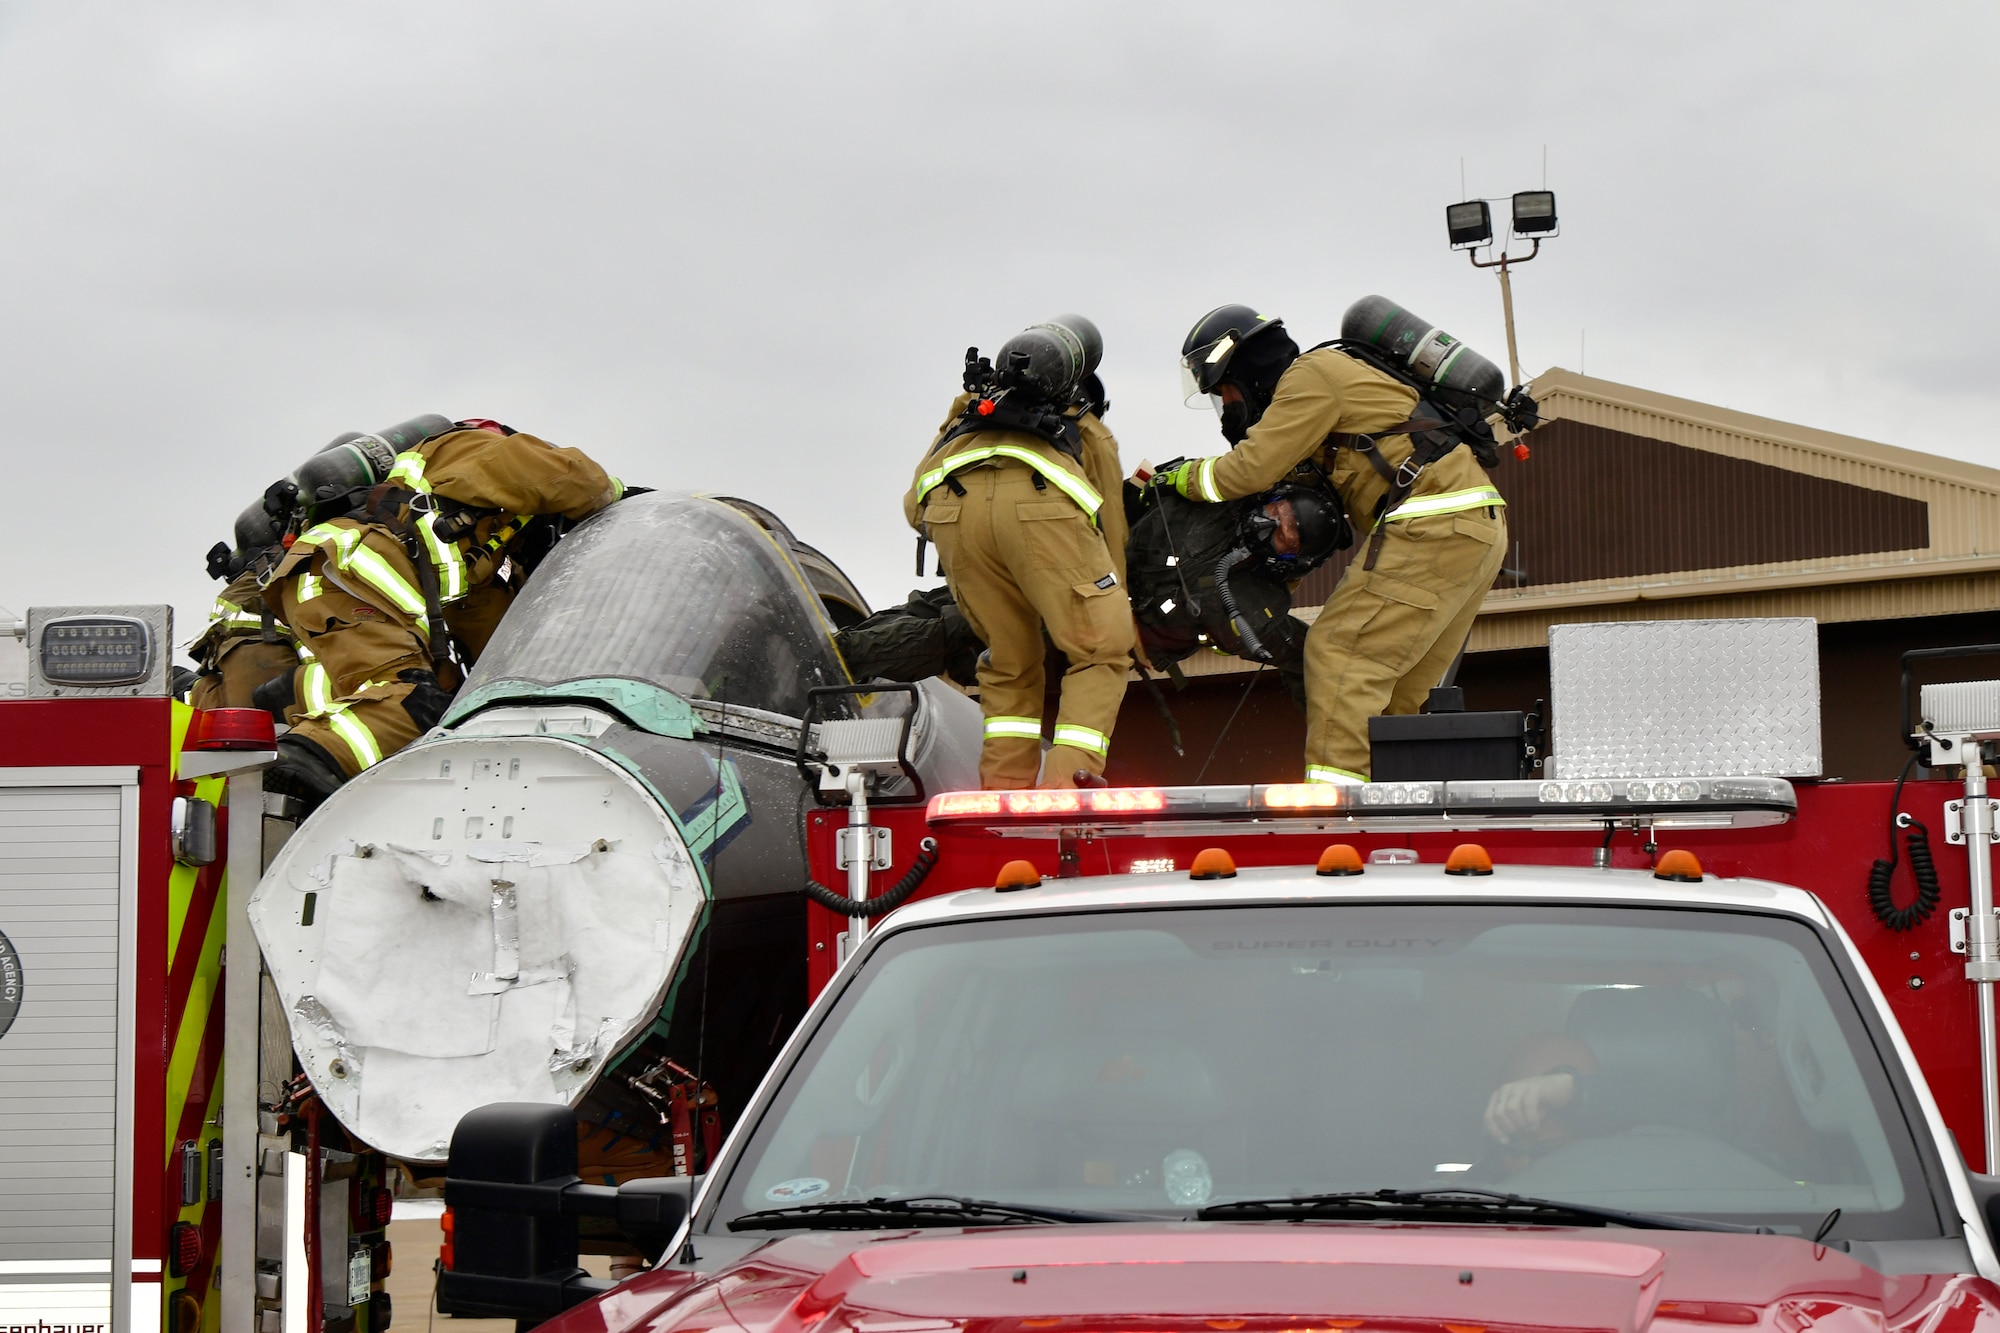 Air Force firefighters use fire trucks to shield aircraft inlets, while practicing emergency aircrew extraction with a dummy Jan. 24, 2023, at Hill Air Force Base, Utah. This was one of several scenarios practiced during an emergency responder working group exercise attended by first responders from across the Air Force to explore emergency engine shutdown and aircrew extraction best practices specific to F-35 aircraft. (U.S. Air Force photo by Todd Cromar)